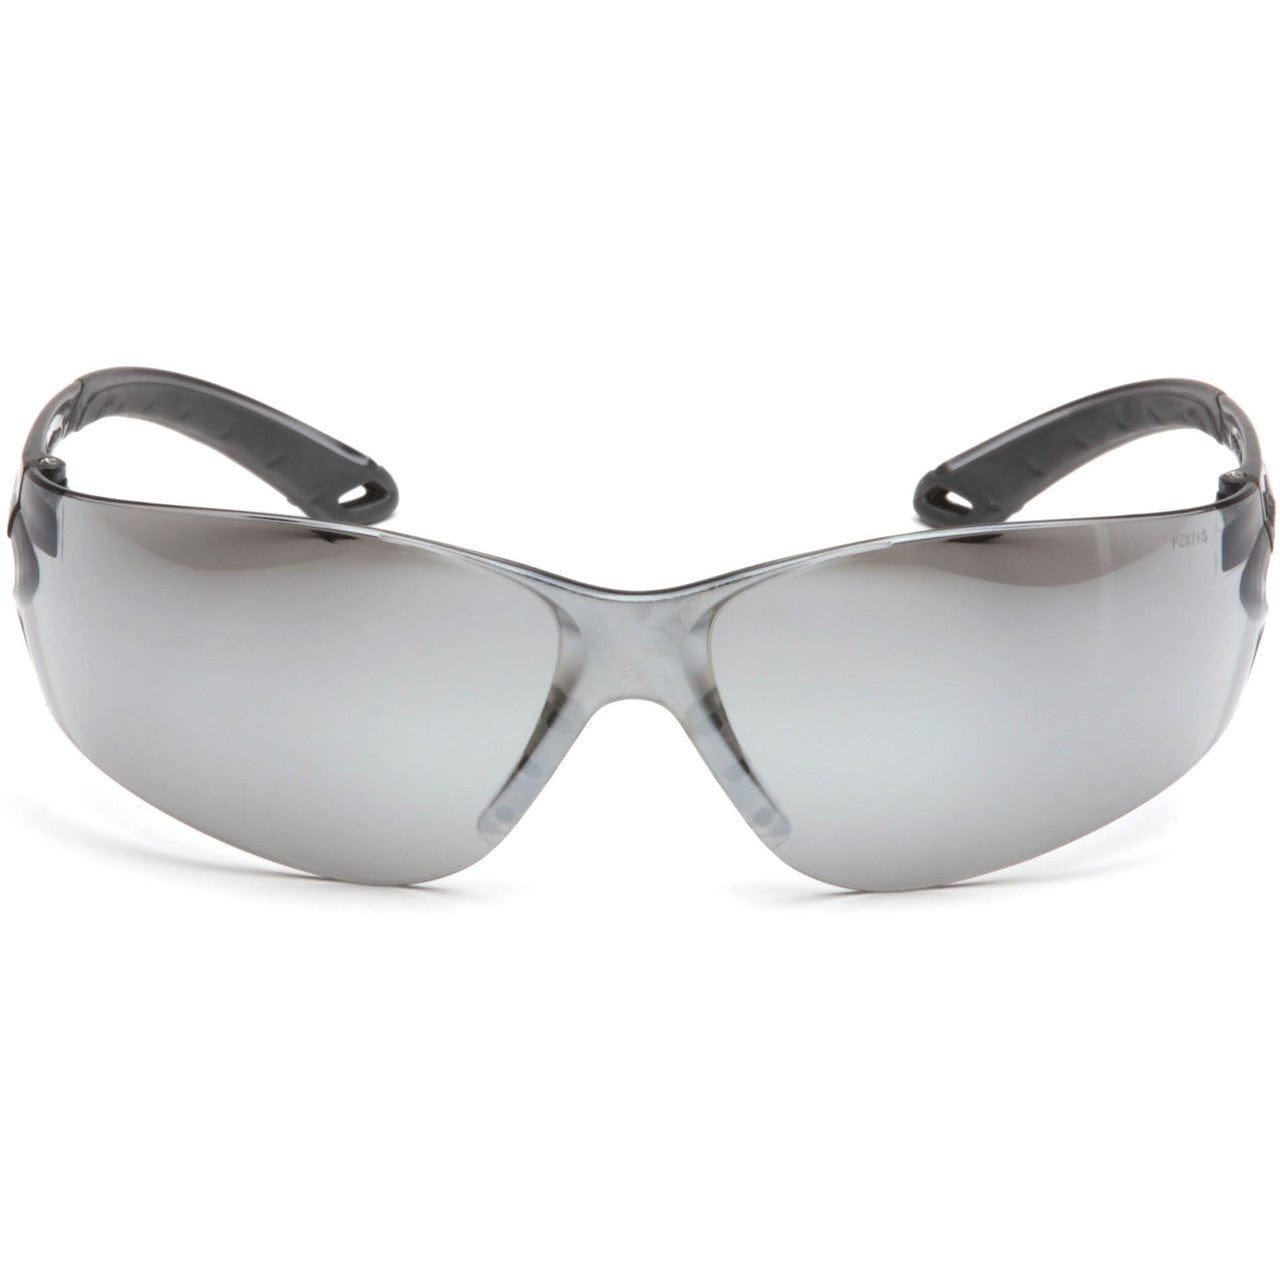 Pyramex Itek Safety Glasses with Silver Mirror Lens S5870S Front View